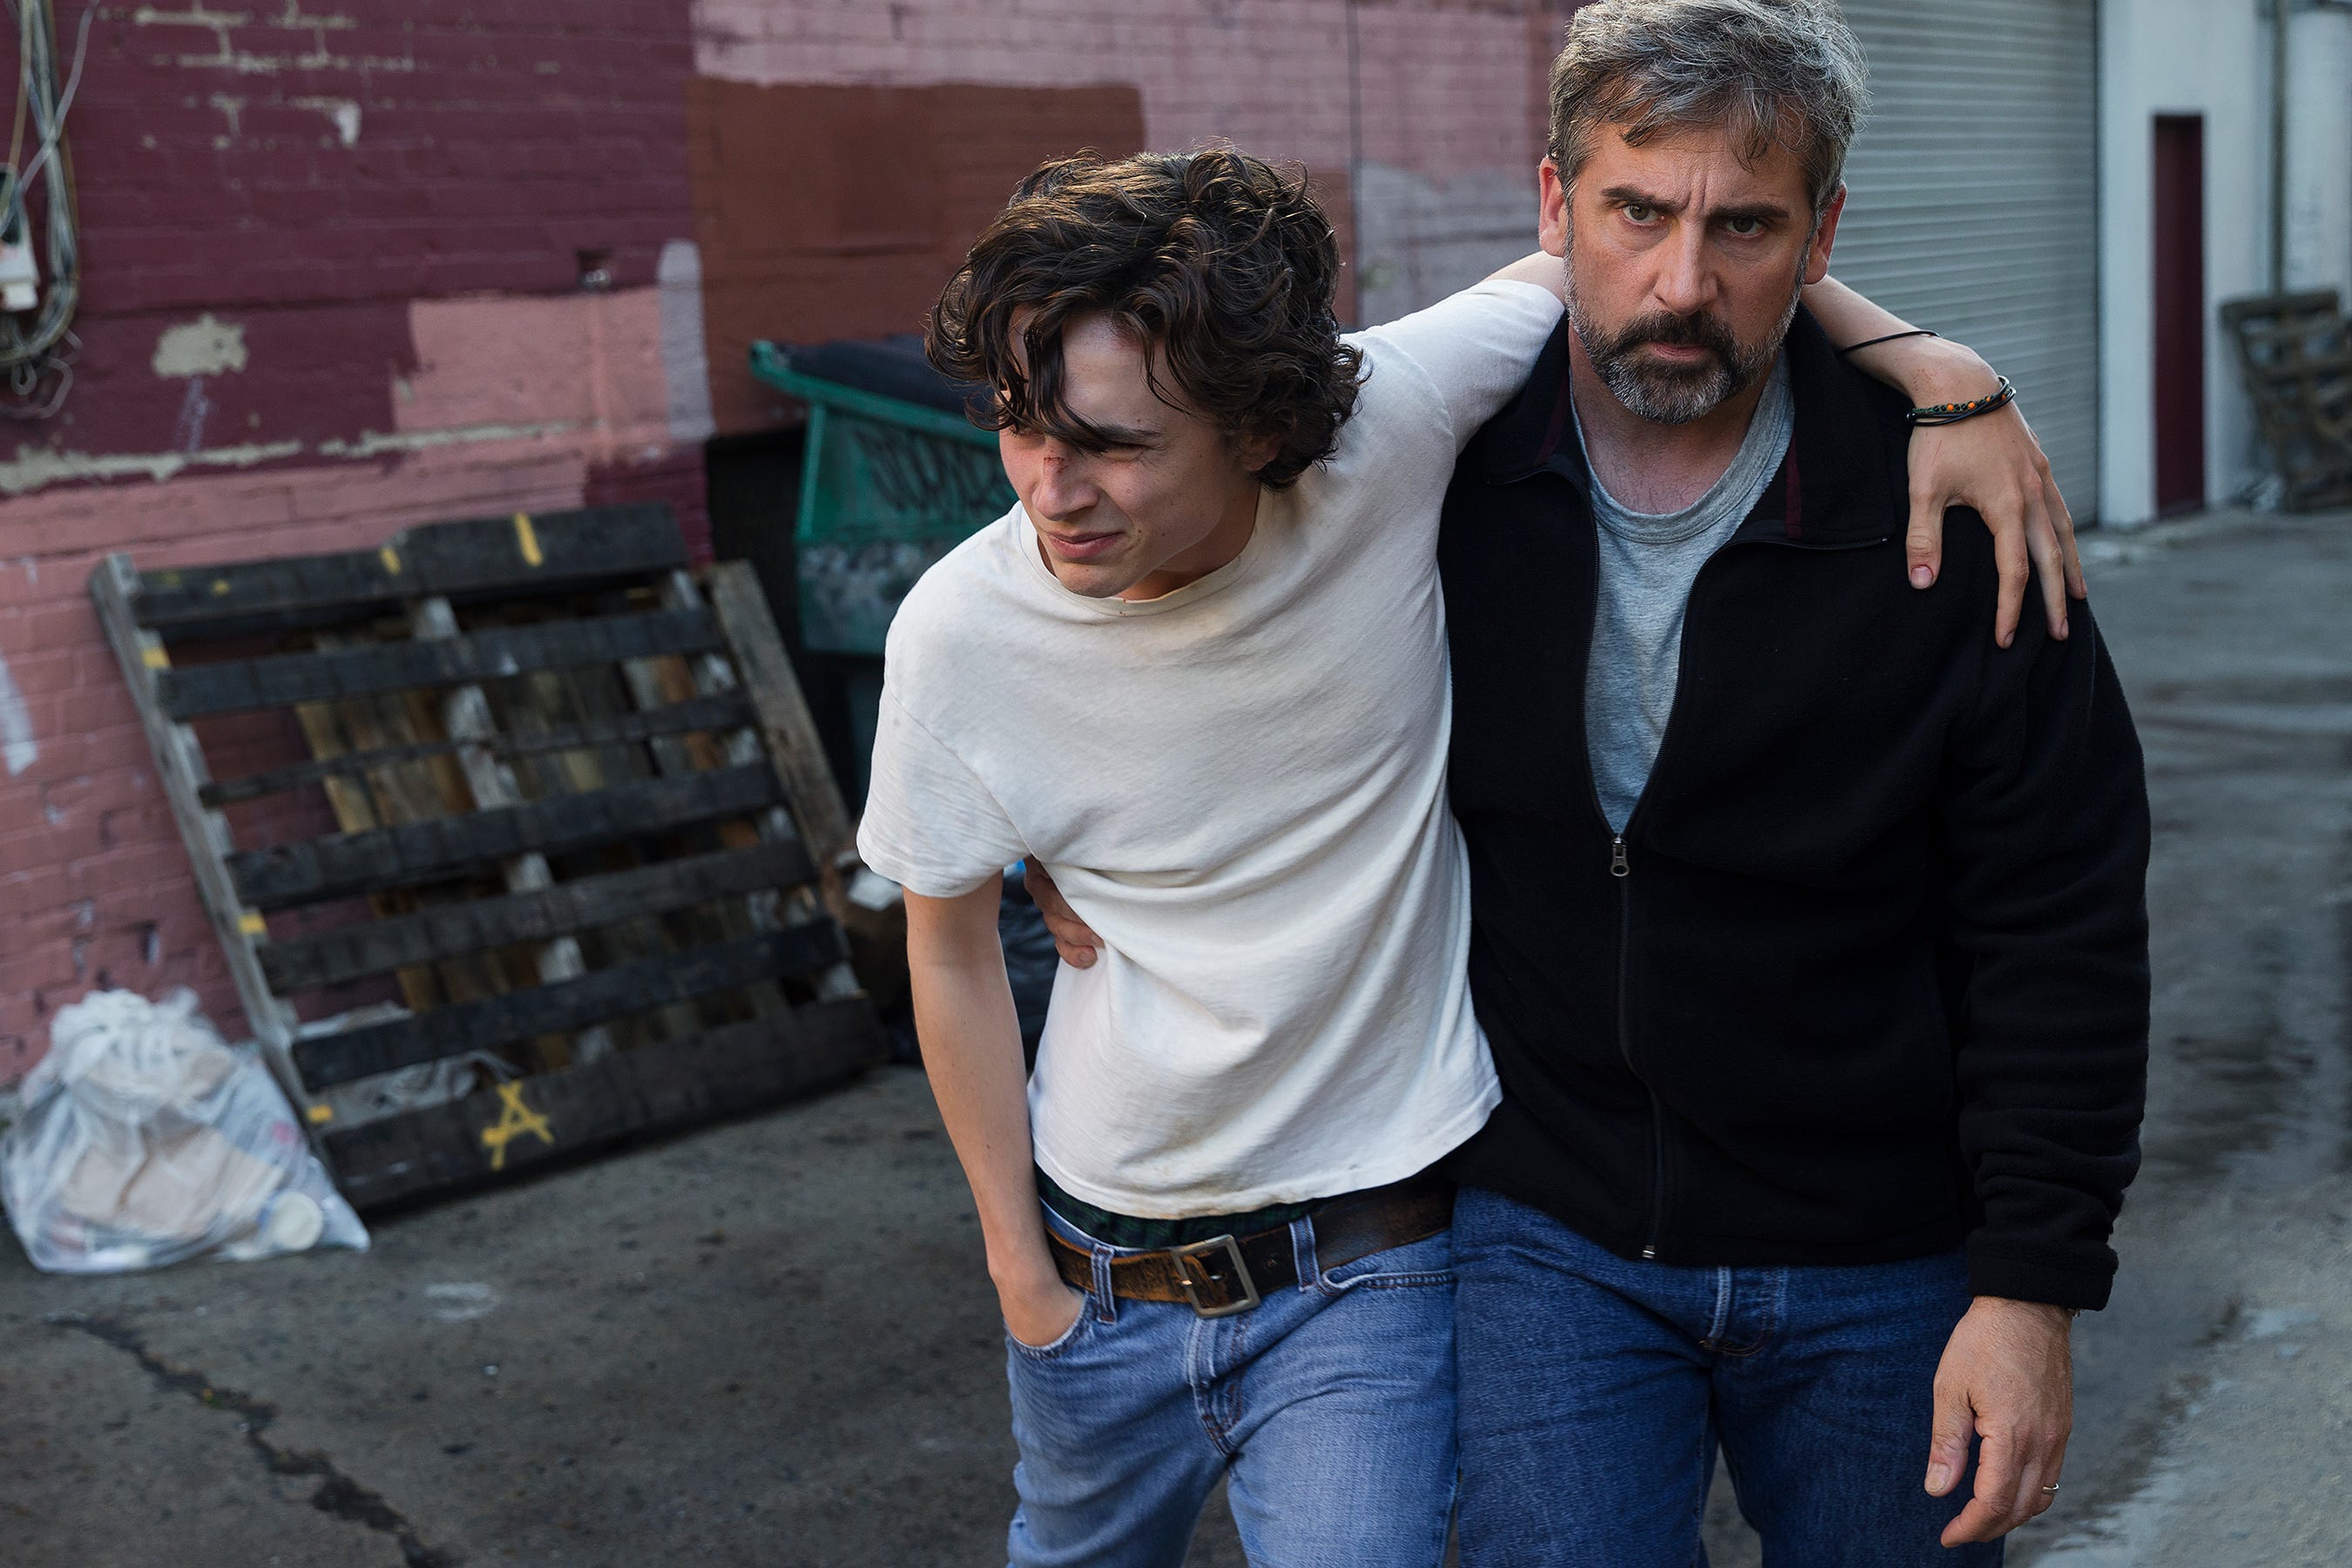 The new film Beautiful Boy is a truly honest tale of the